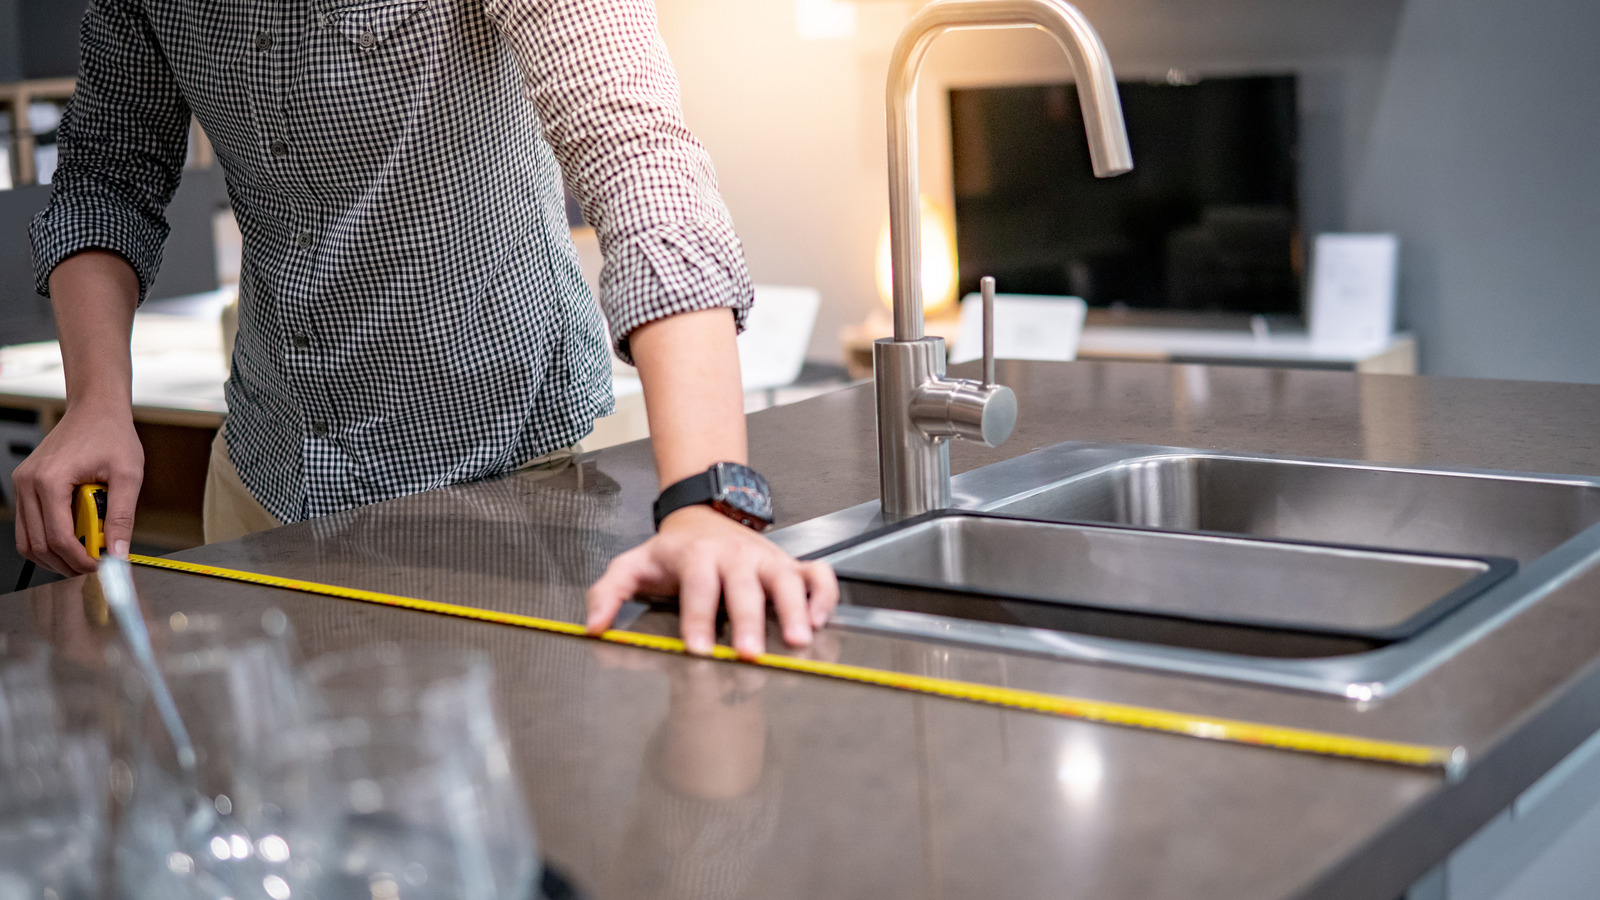 https://www.housedigest.com/img/gallery/5-things-to-consider-before-installing-quartz-countertops/l-intro-1659529913.jpg